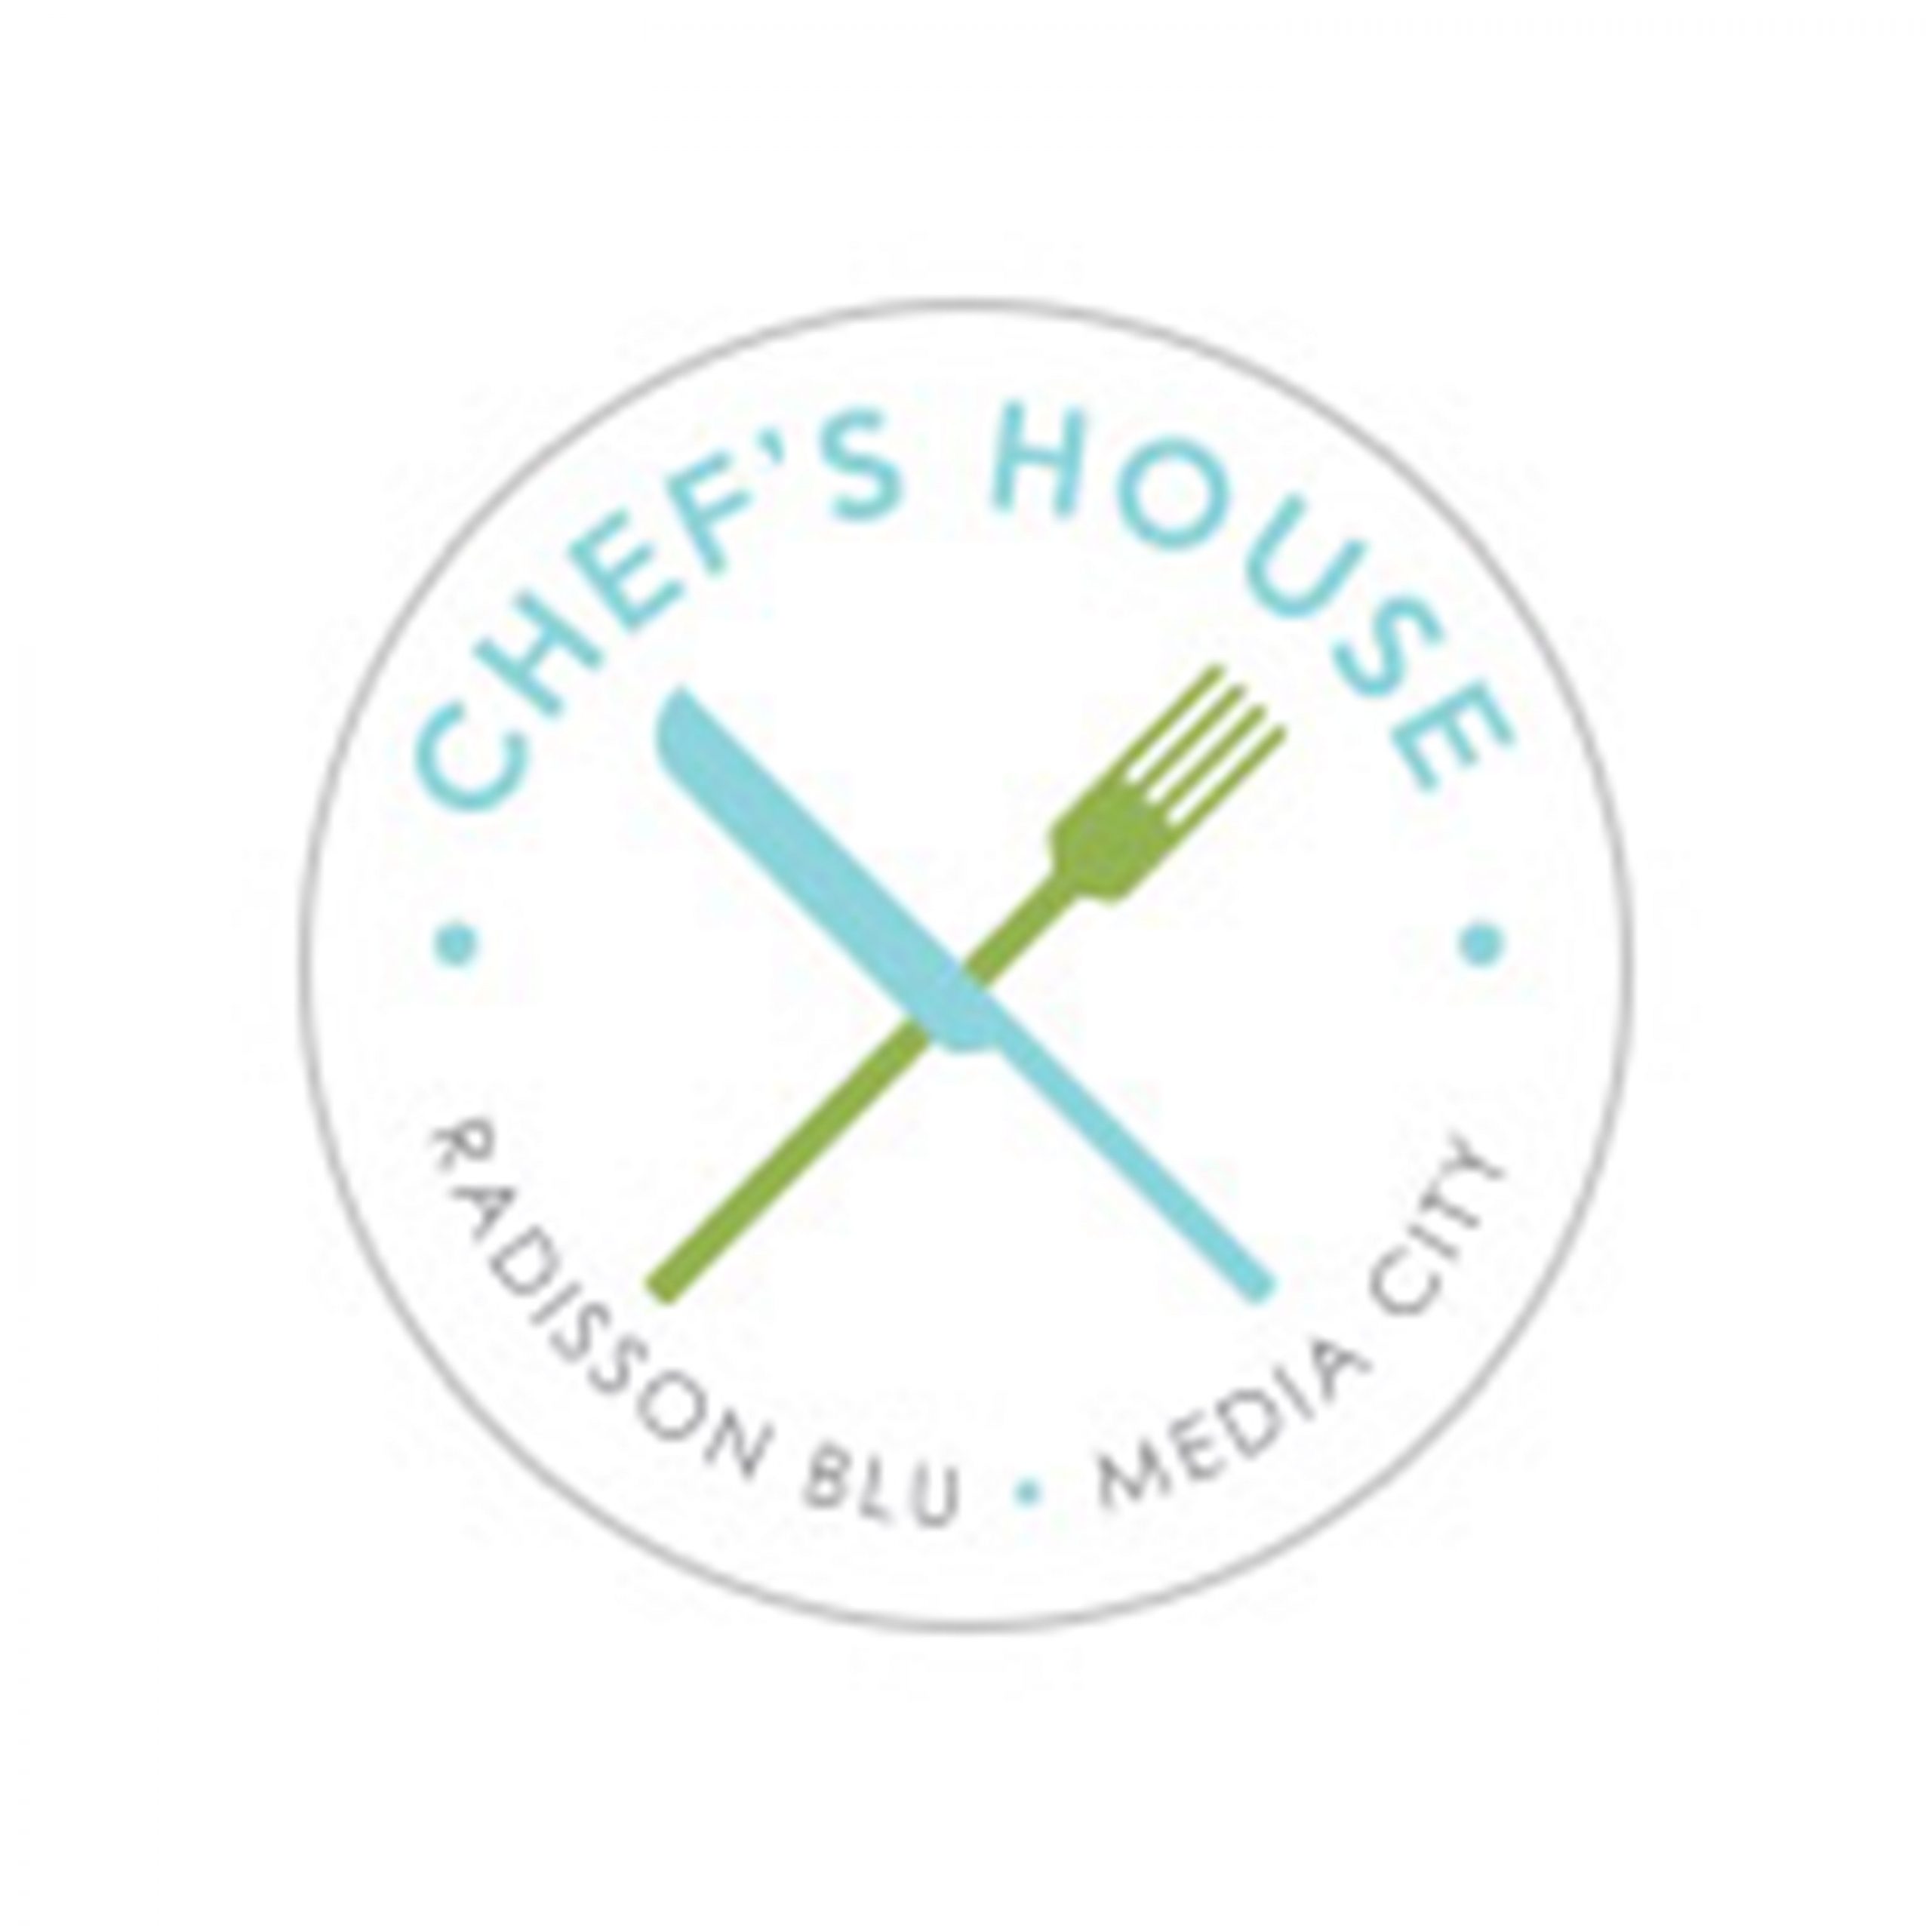 Chef’s House - Coming Soon in UAE